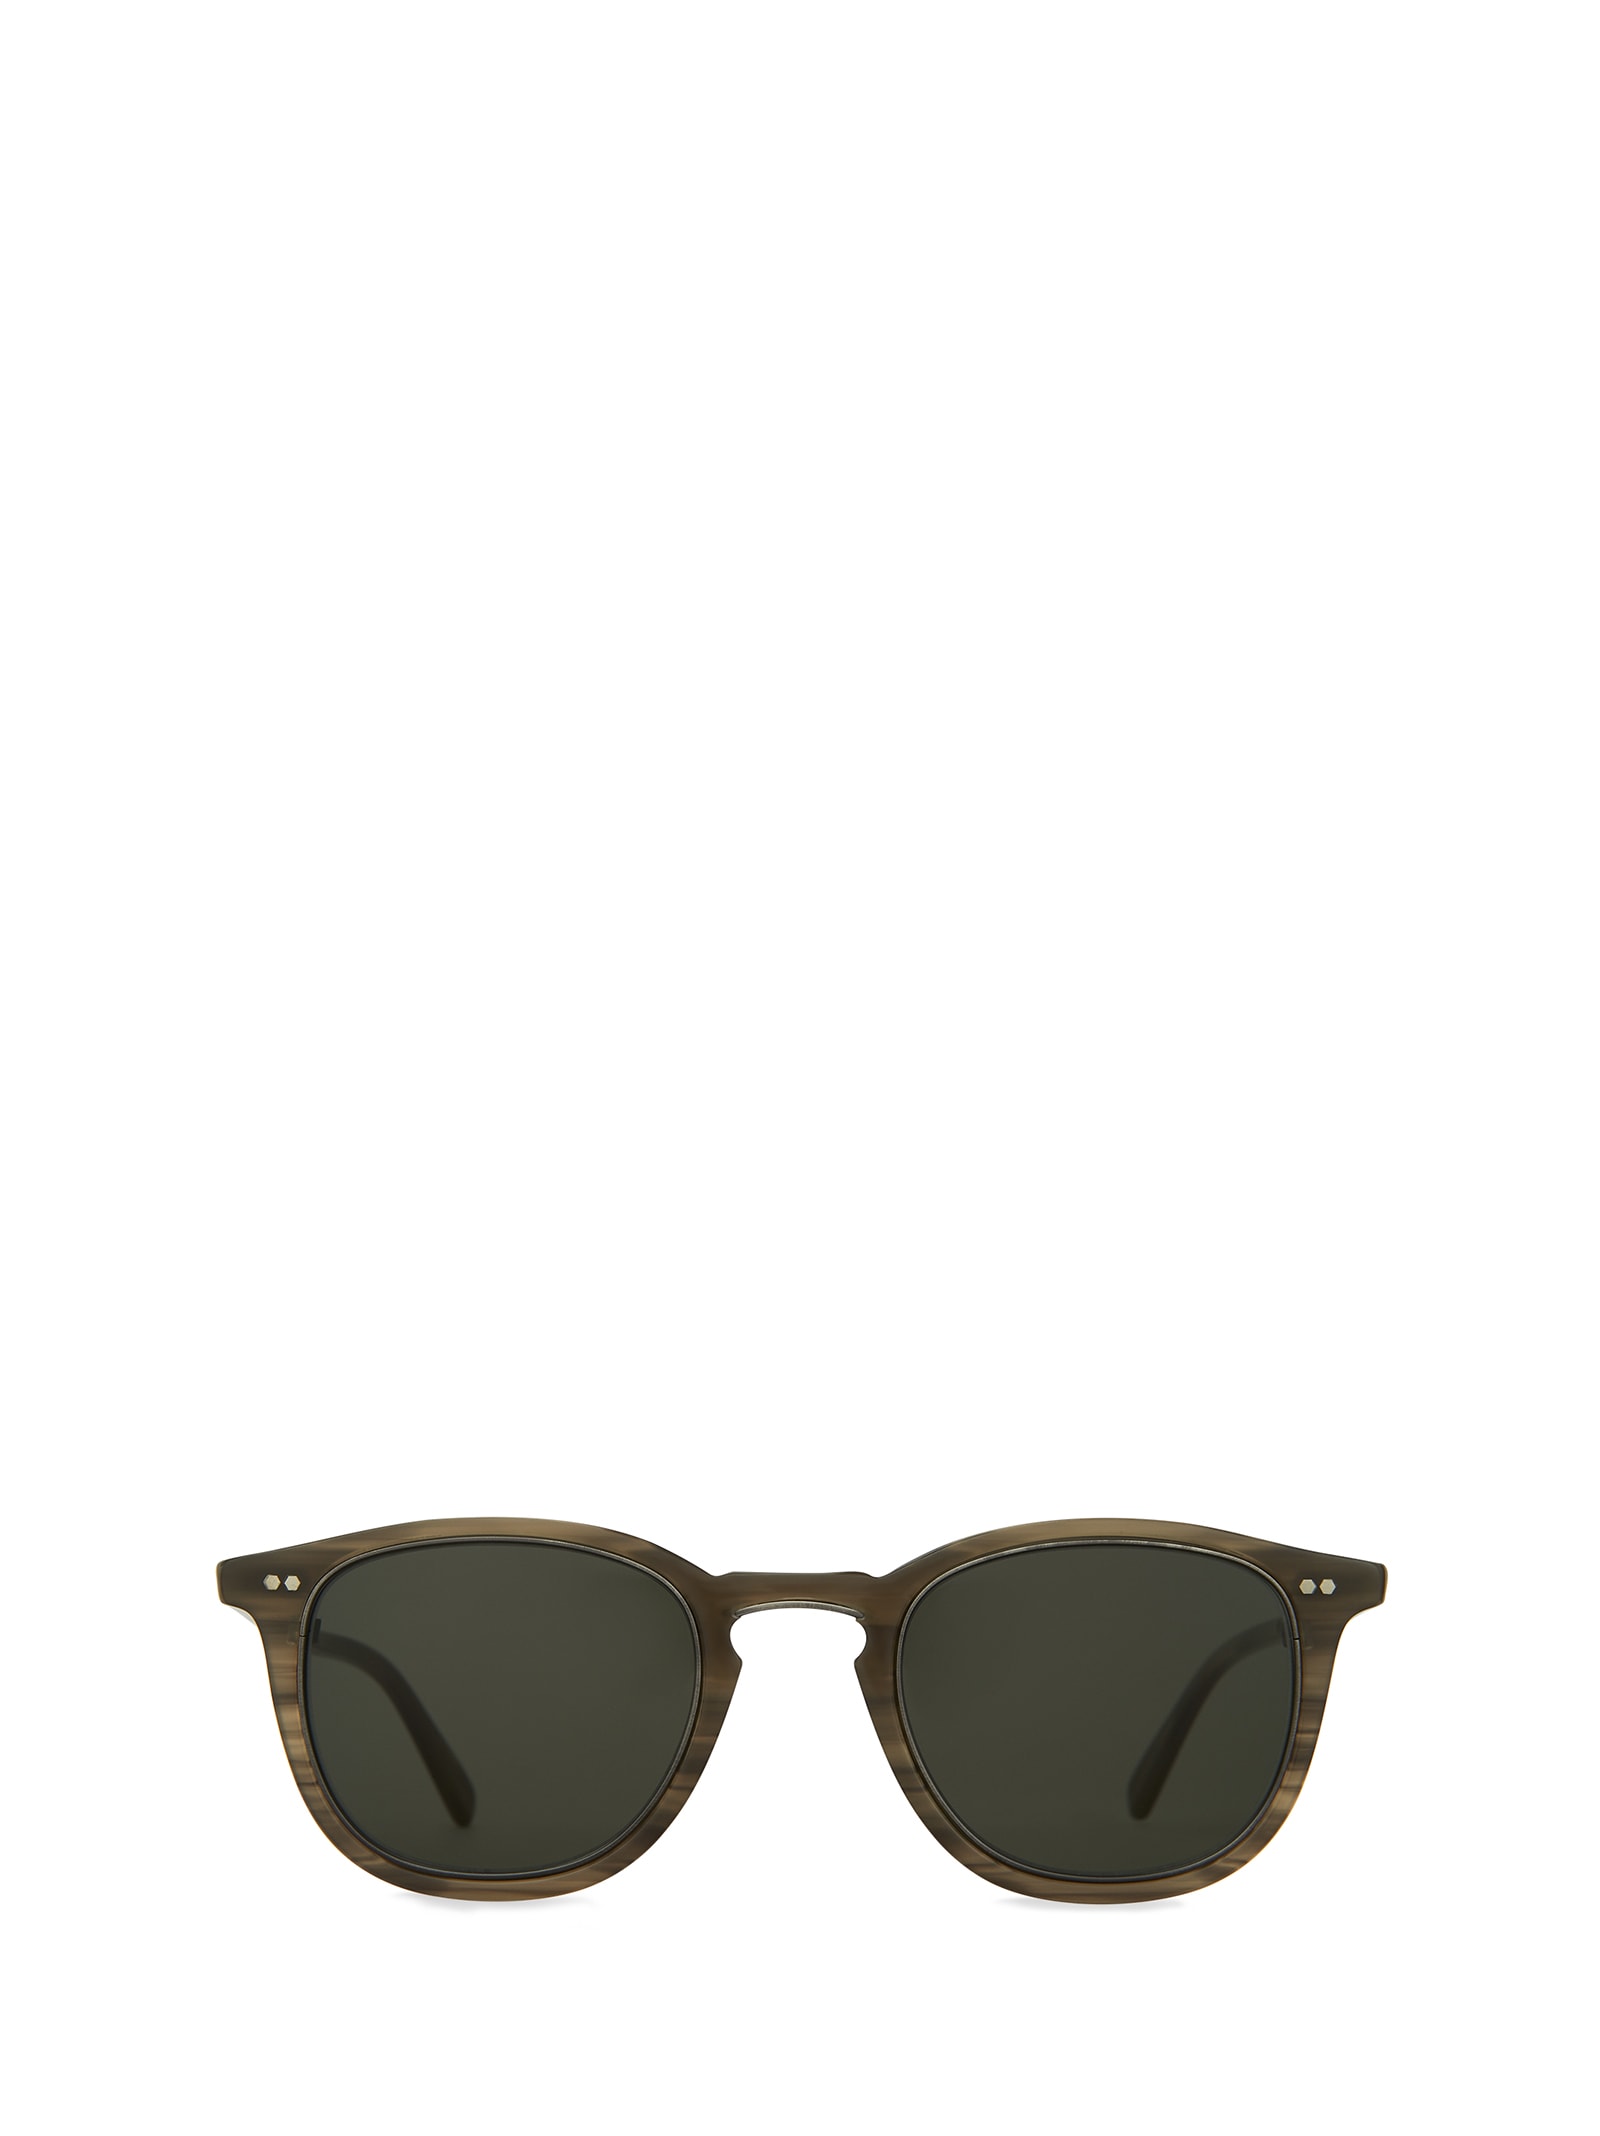 MR LEIGHT COOPERS S GREYWOOD - PEWTER SUNGLASSES